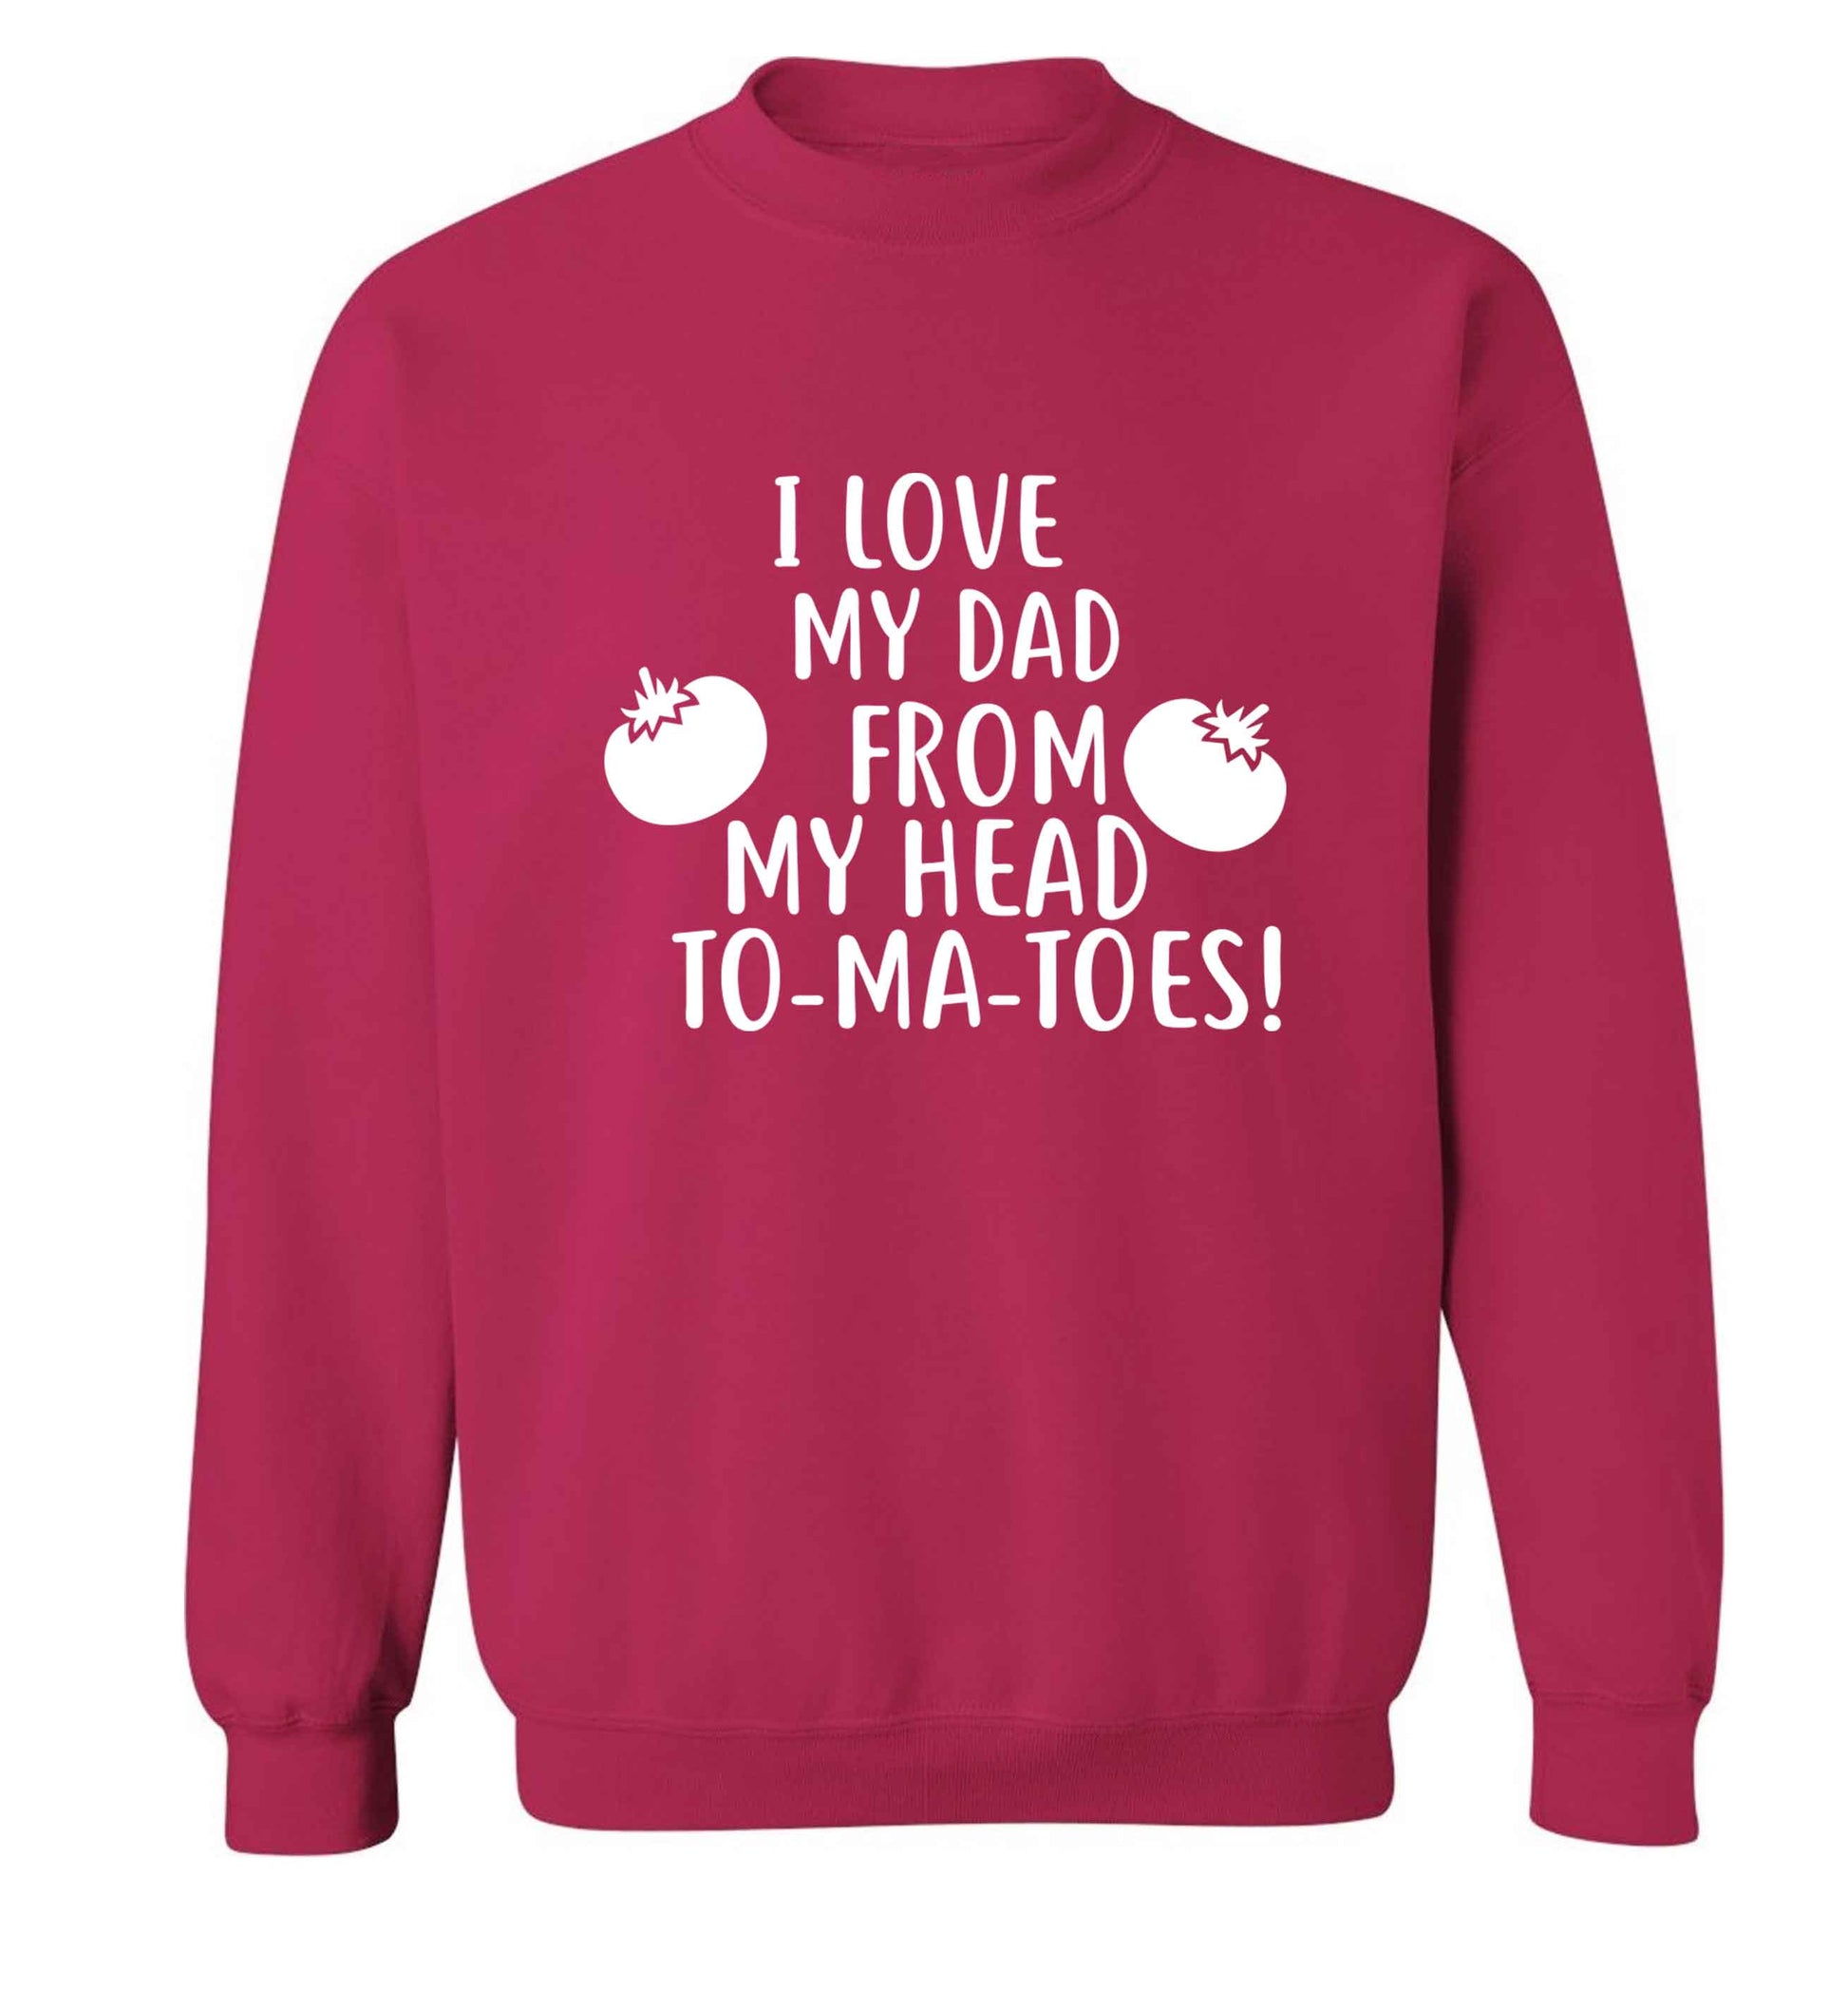 I love my dad from my head to-ma-toes adult's unisex pink sweater 2XL